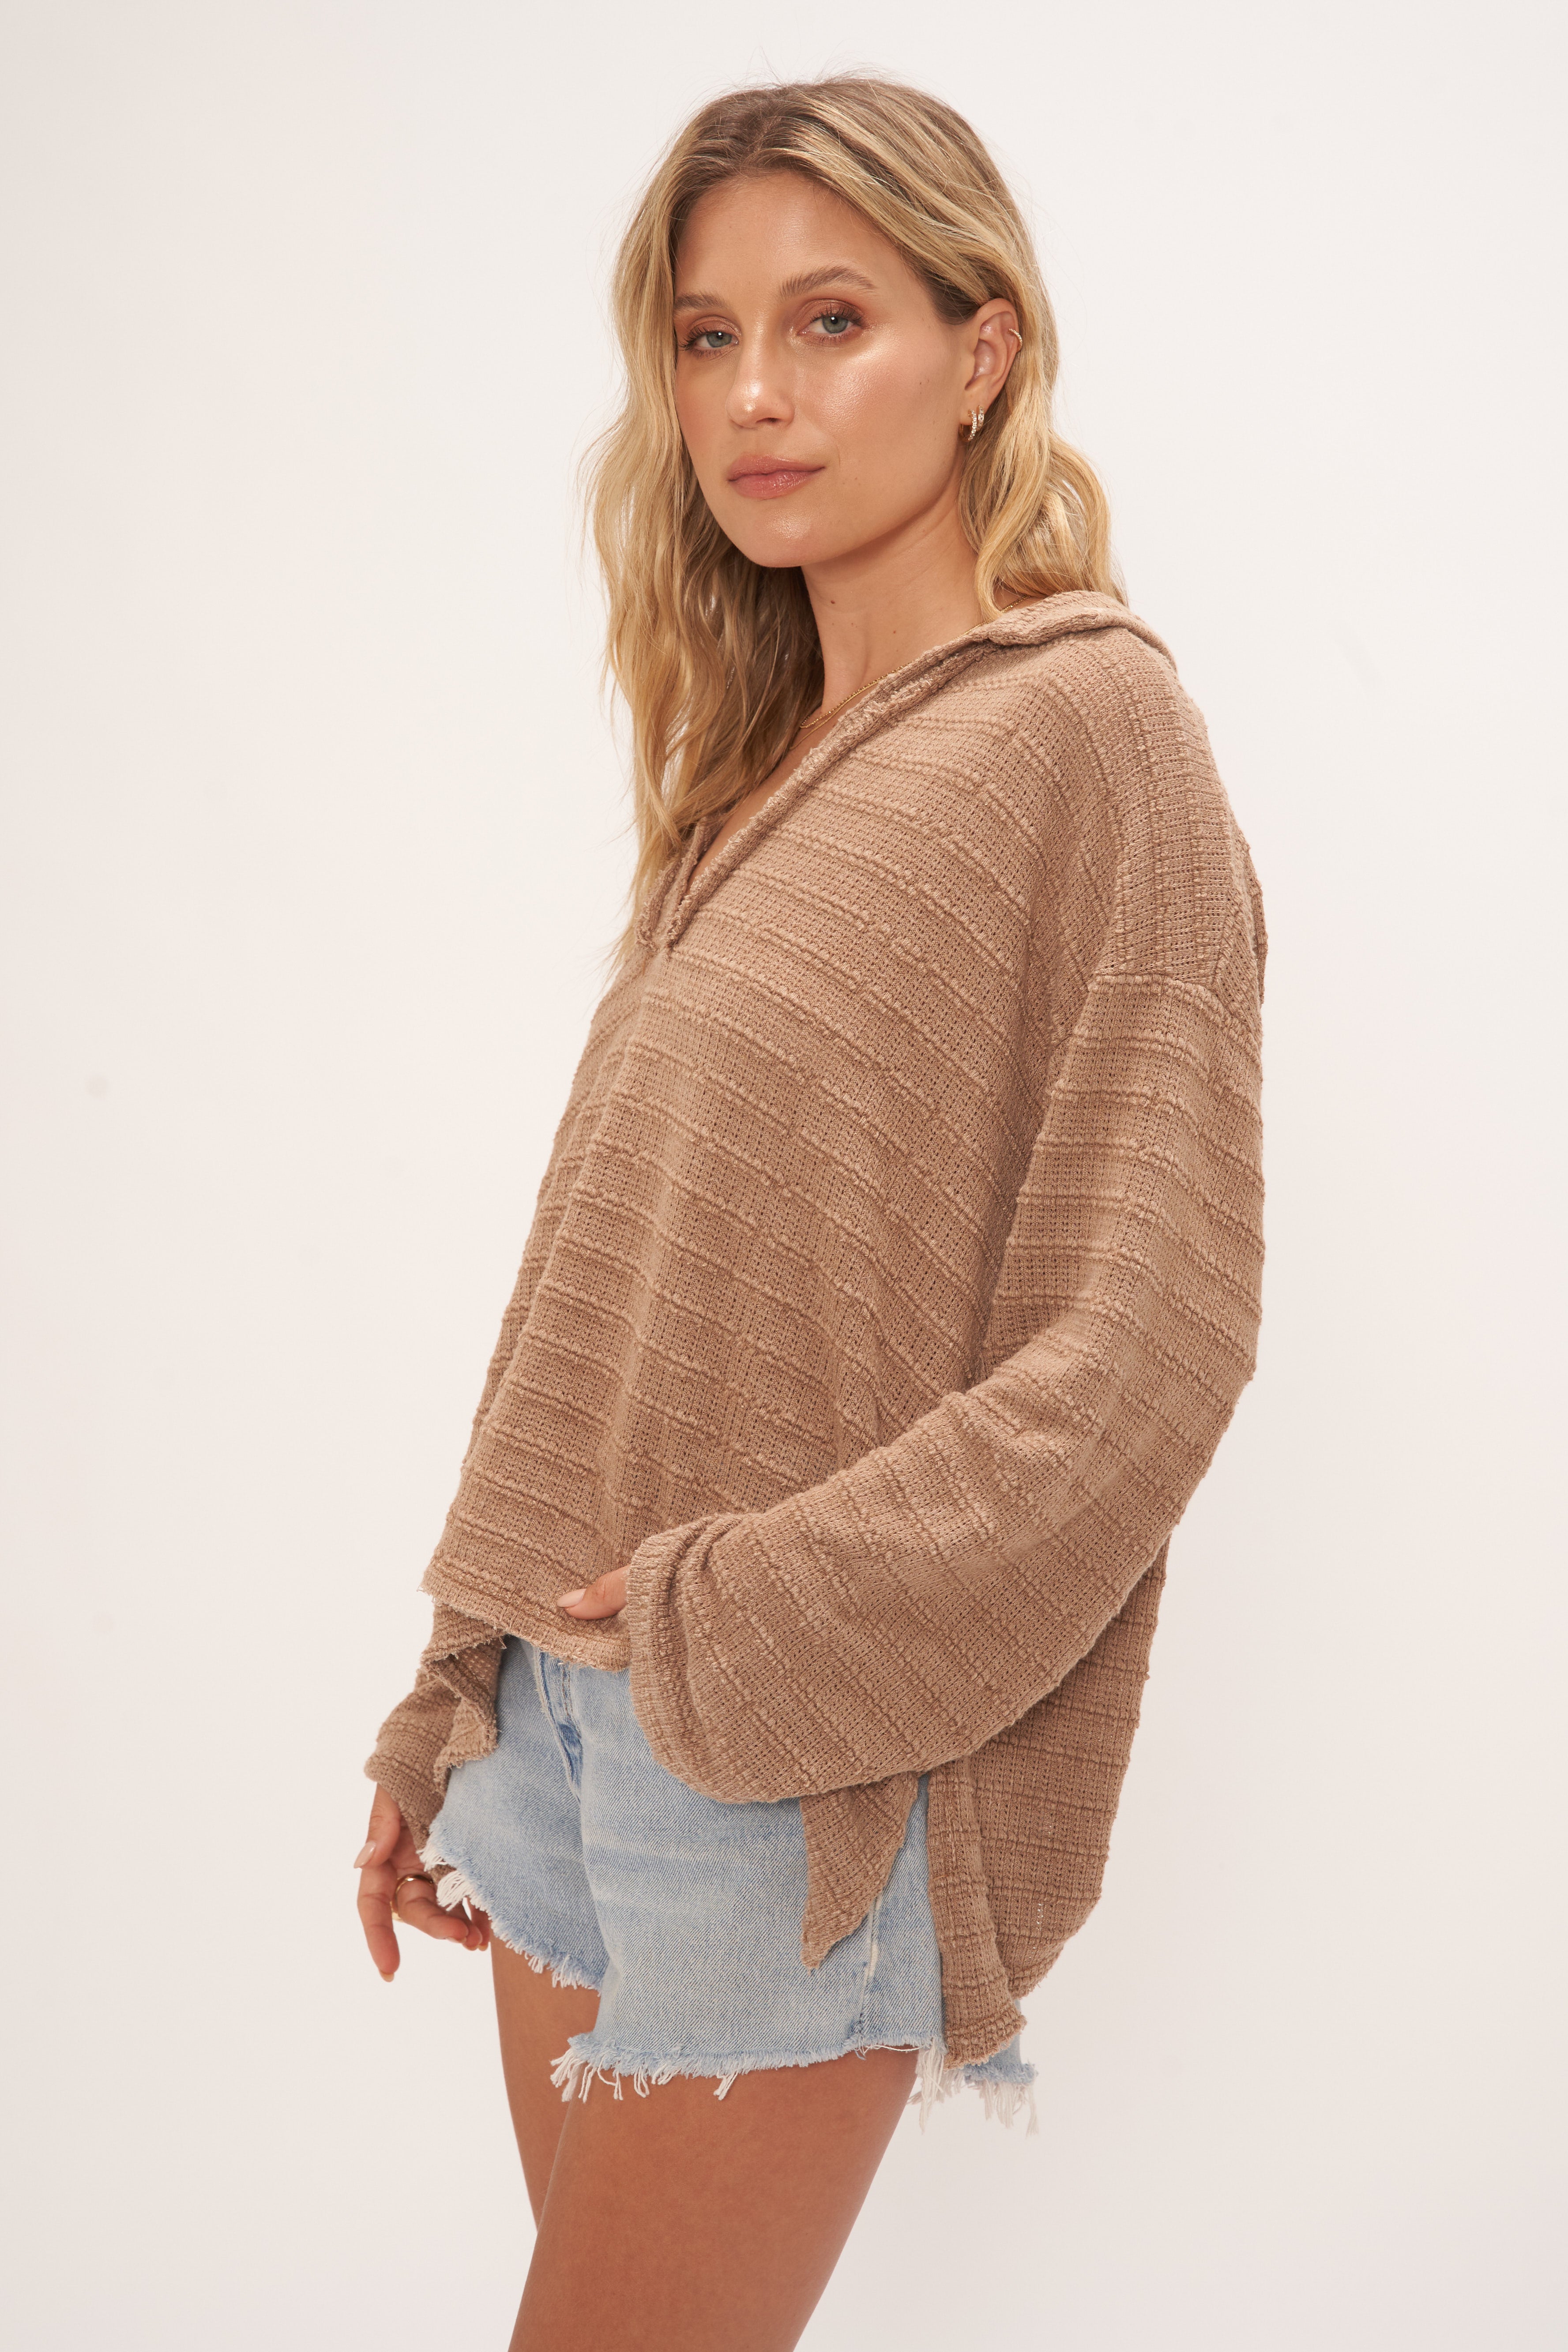 Capistrano Collared Washed Pullover